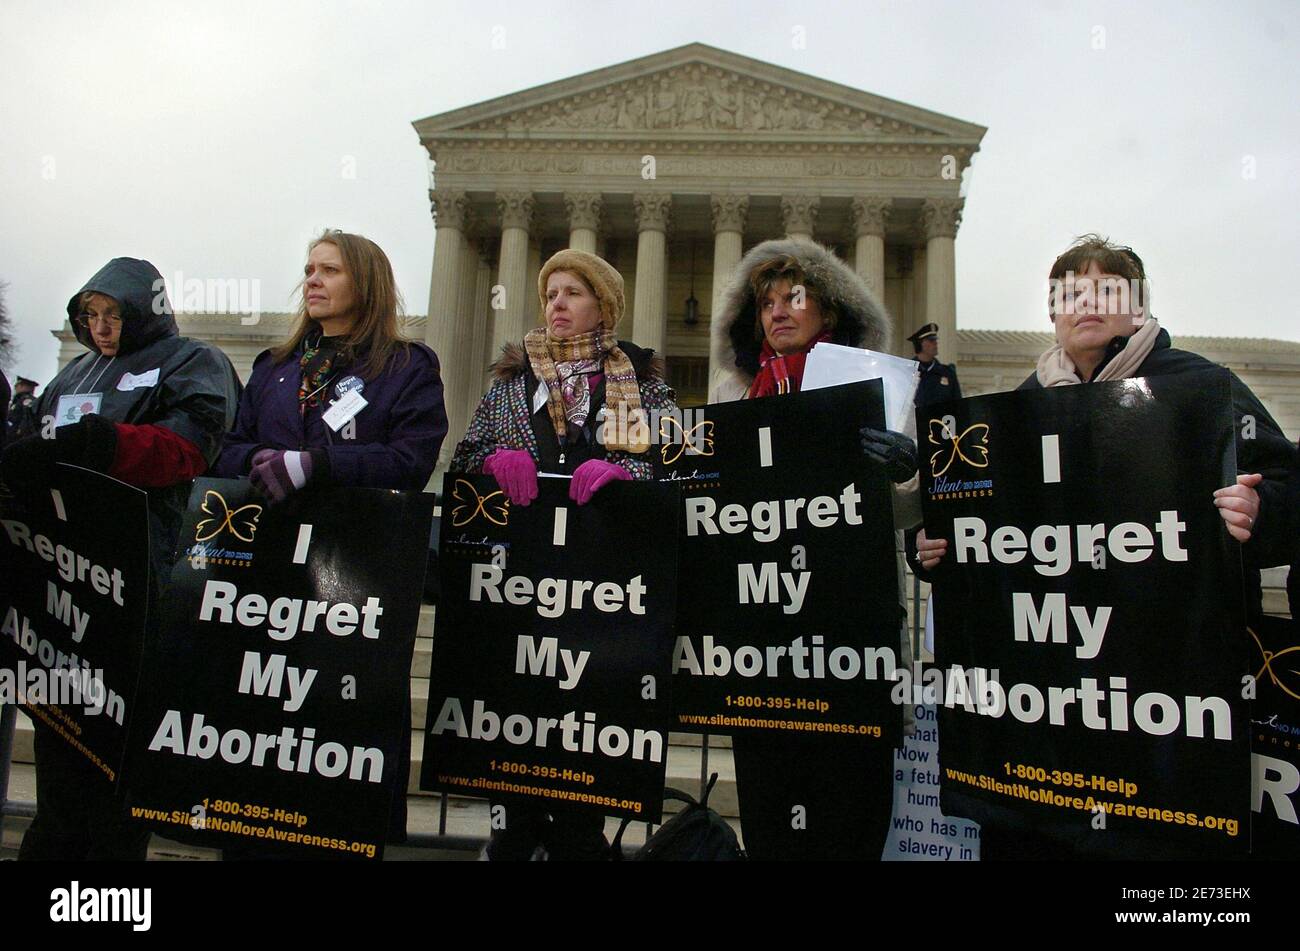 Pro-life demonstrators listen to speakers as they stand in front of the US Supreme Court to mark the 35th anniversary of Roe vs Wade, the landmark legislation which allowed abortion rights, during a rally in Washington January 22, 2008.      REUTERS/Mike Theiler  (UNITED STATES) Stock Photo